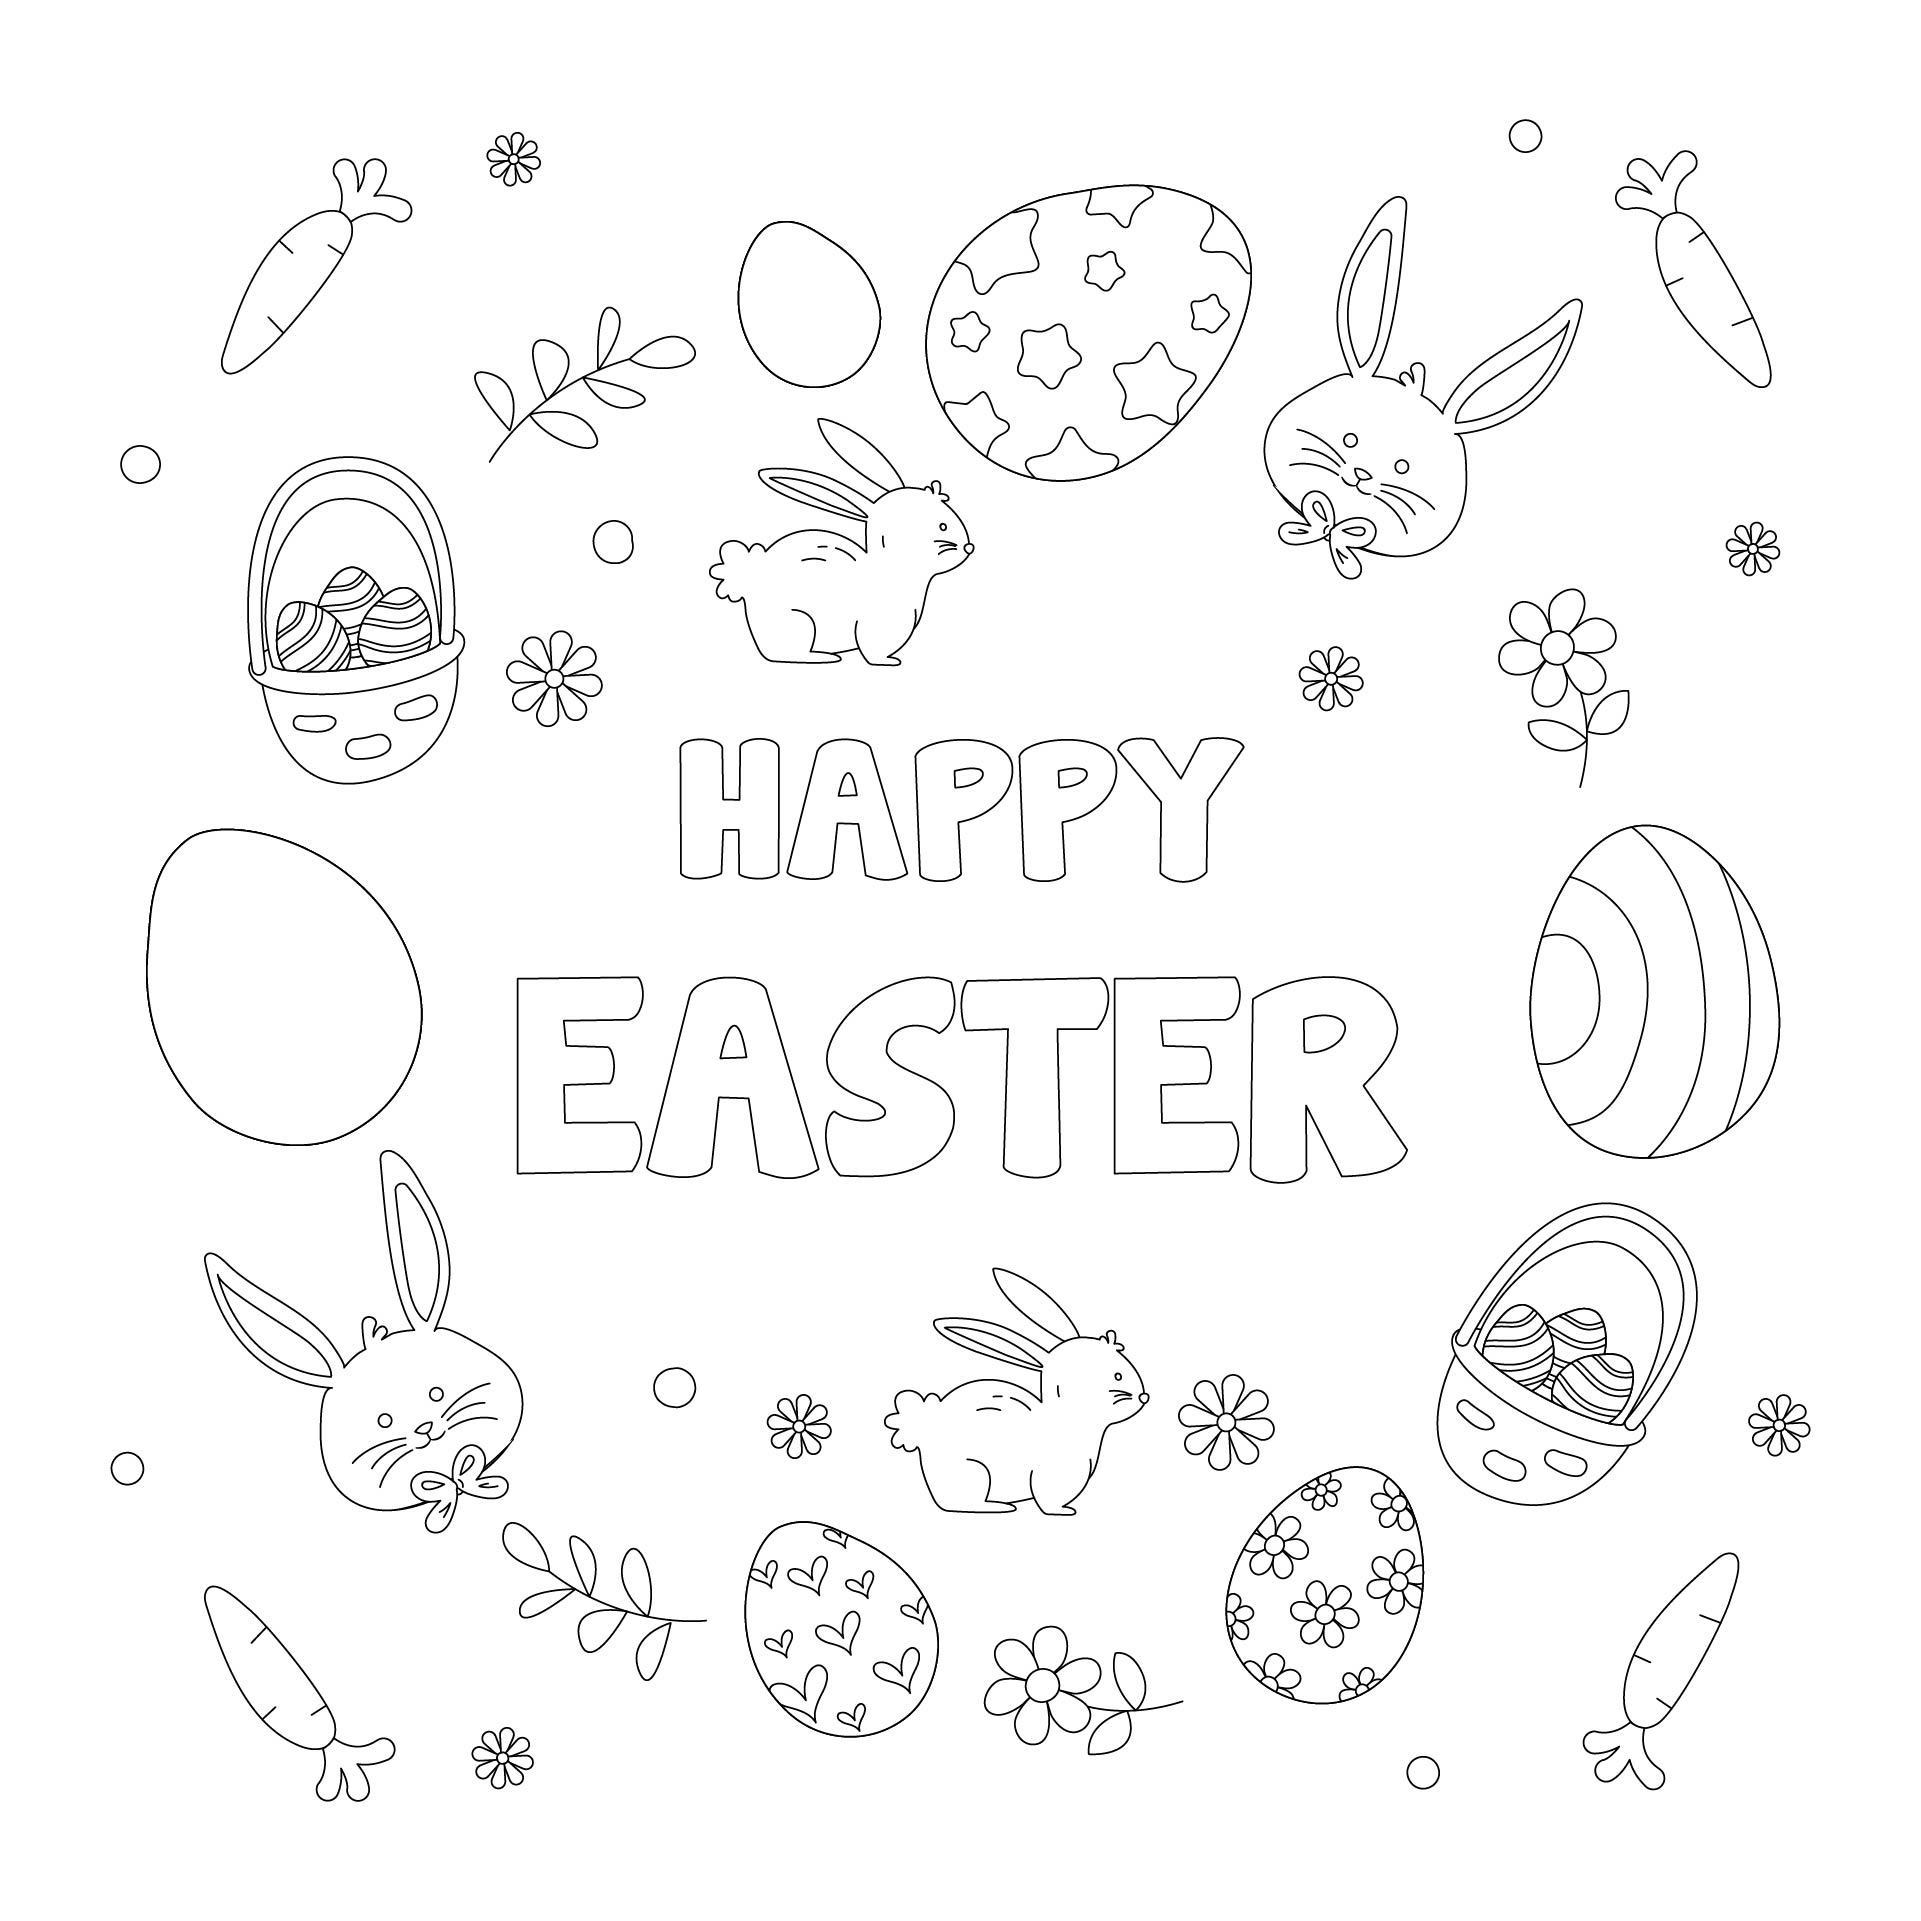 Printable Happy Easter Doodle Card Coloring Page